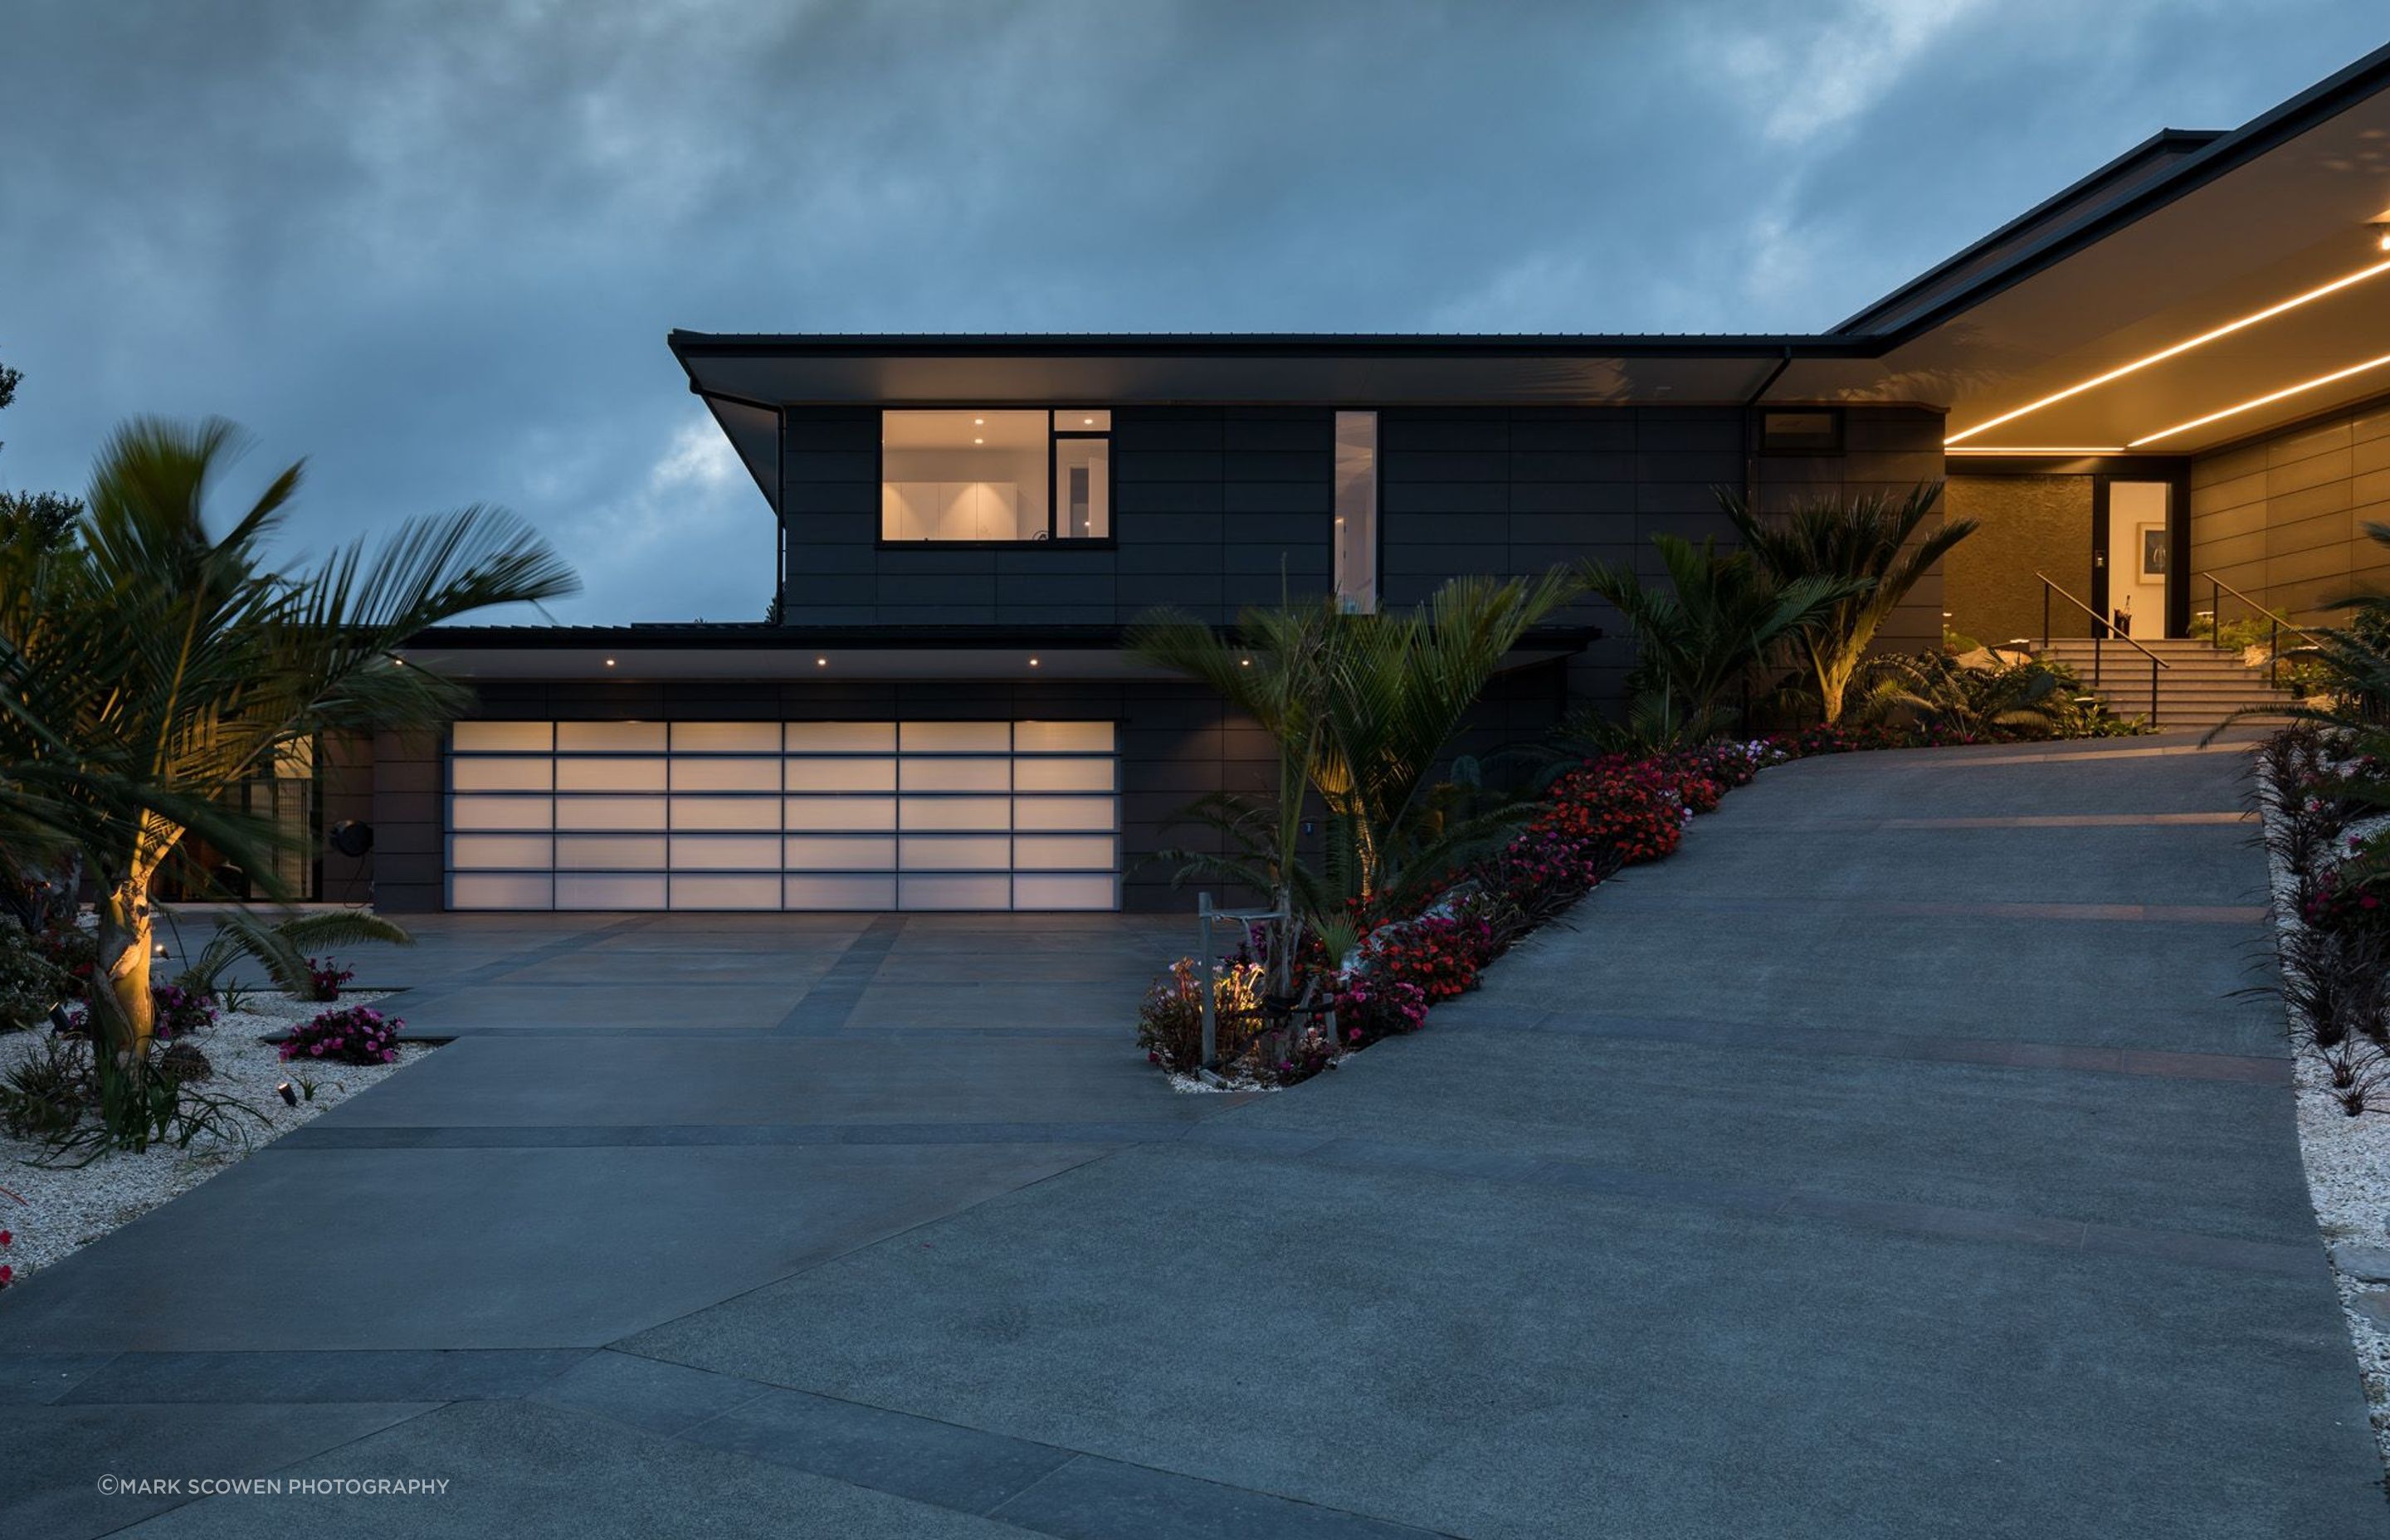 The front driveway leading the house is lined with sub-tropical plants. The garage (leftt) lights up like a lantern at night, while LED lights in the soffit direct visitors to the main entrance.